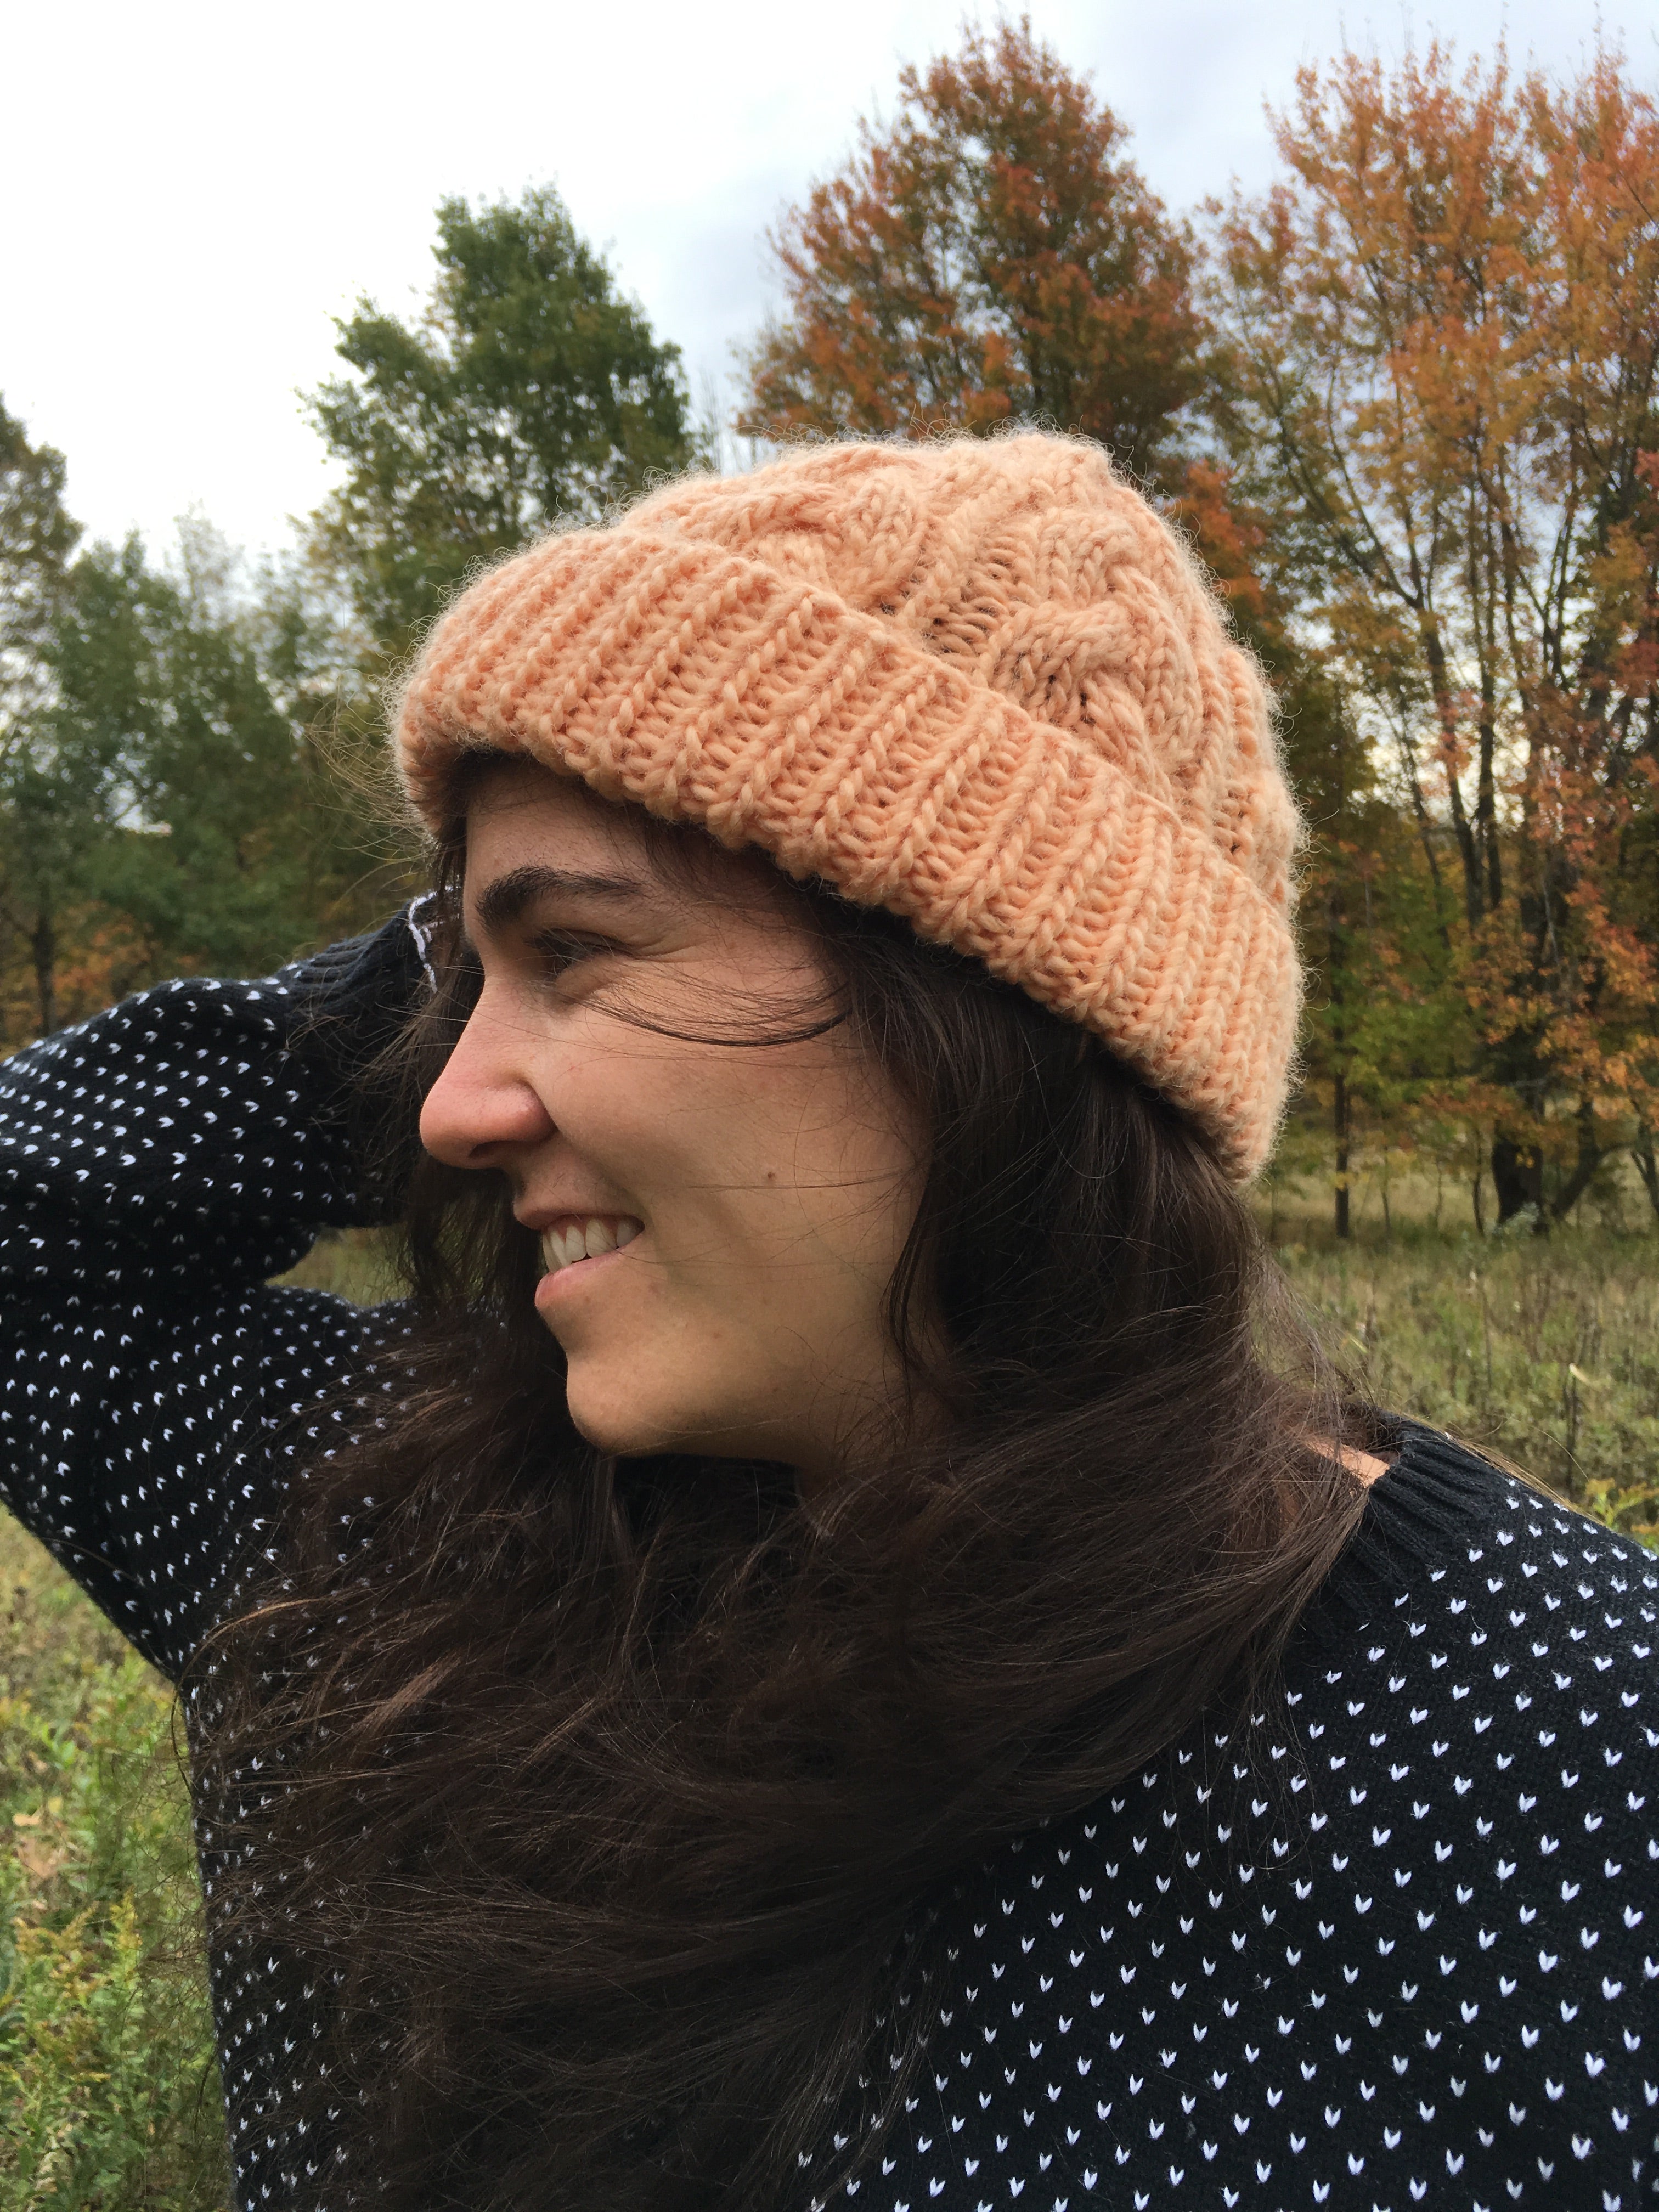 Pine Forest Toque Kit featuring Topsy Farms Yarn